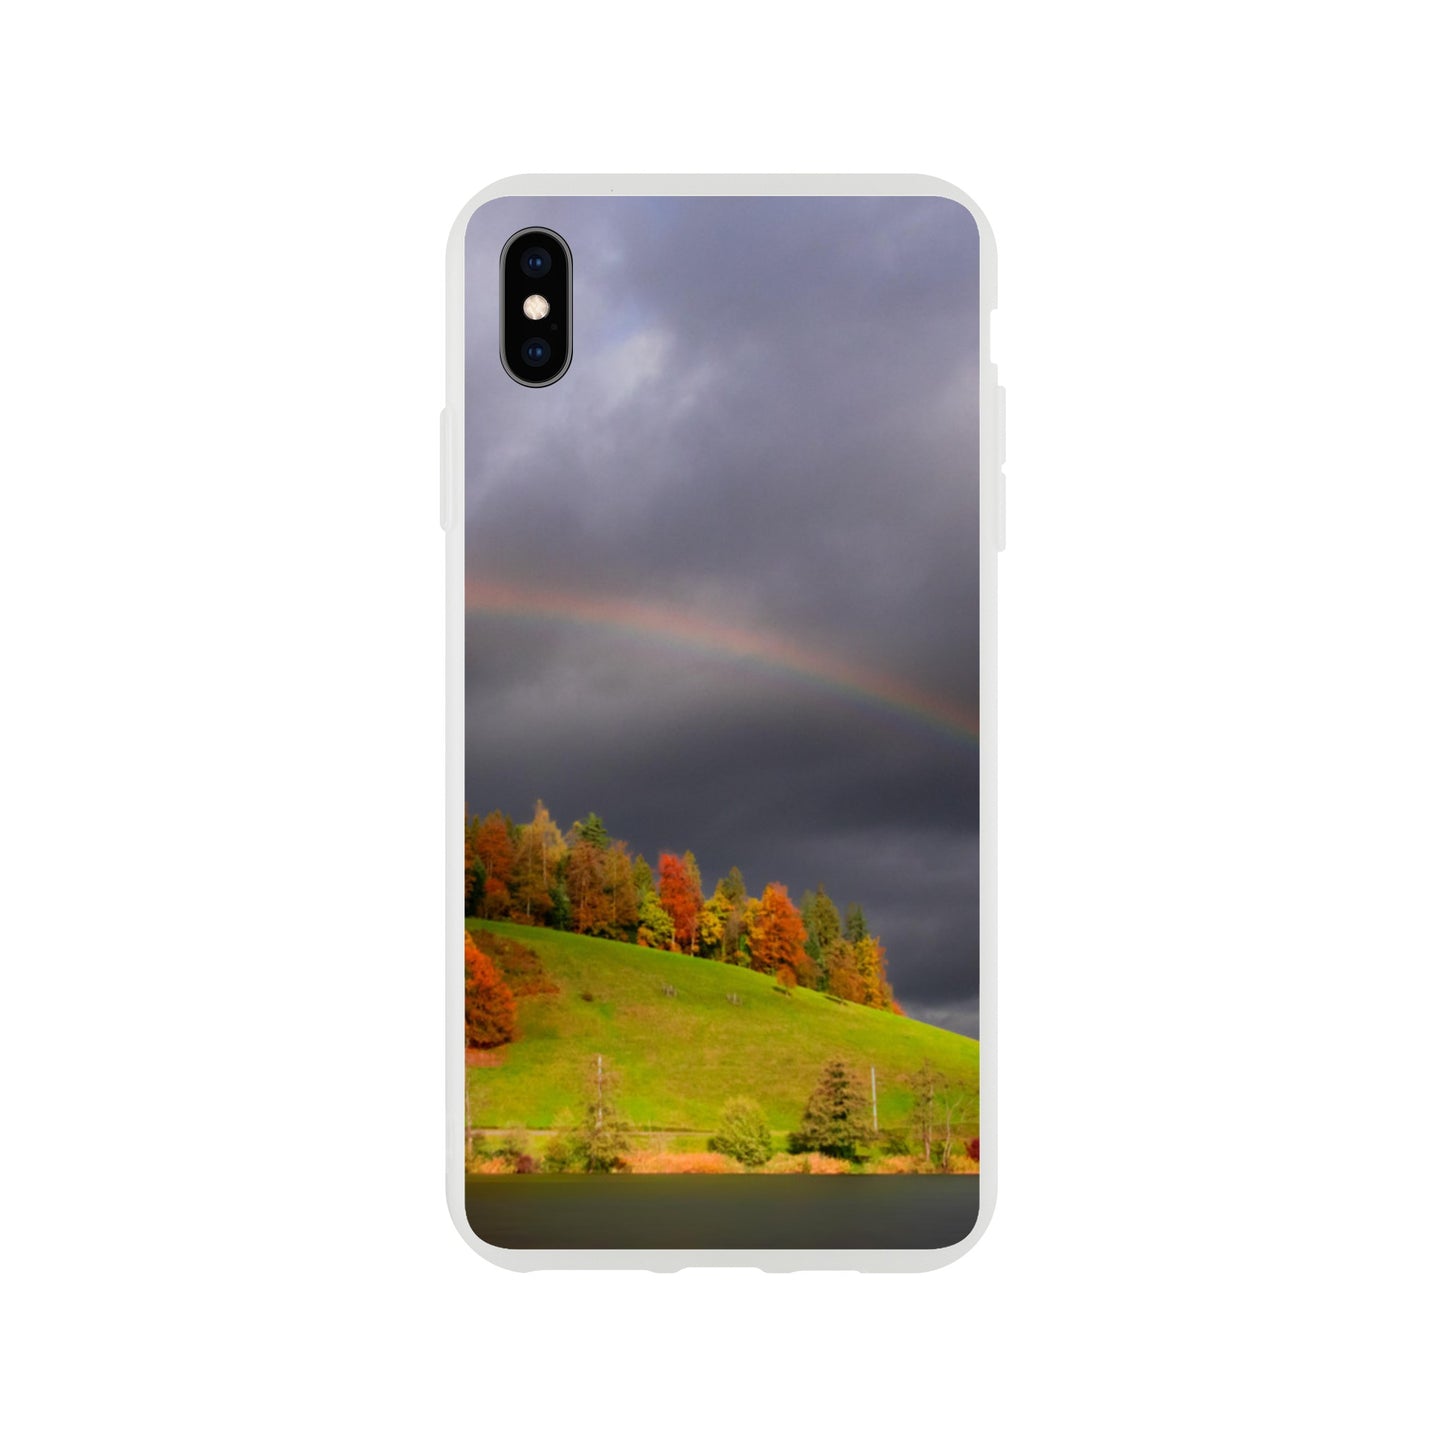 Rainbow motif: Flexi-Case mobile phone case for iPhone and Samsung